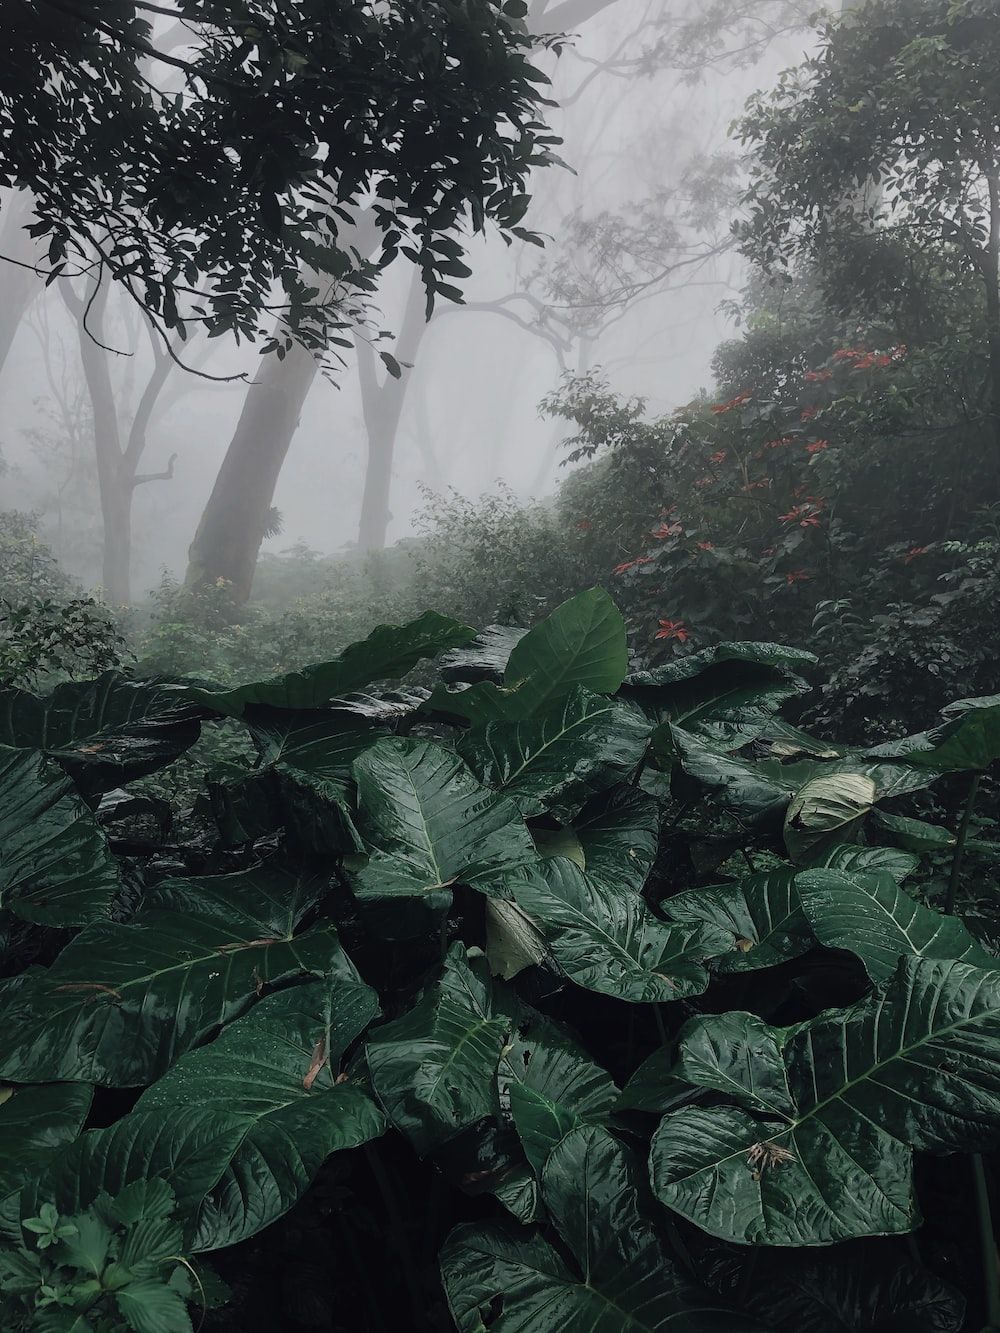 Tropical Rainforest Picture. Download Free Image